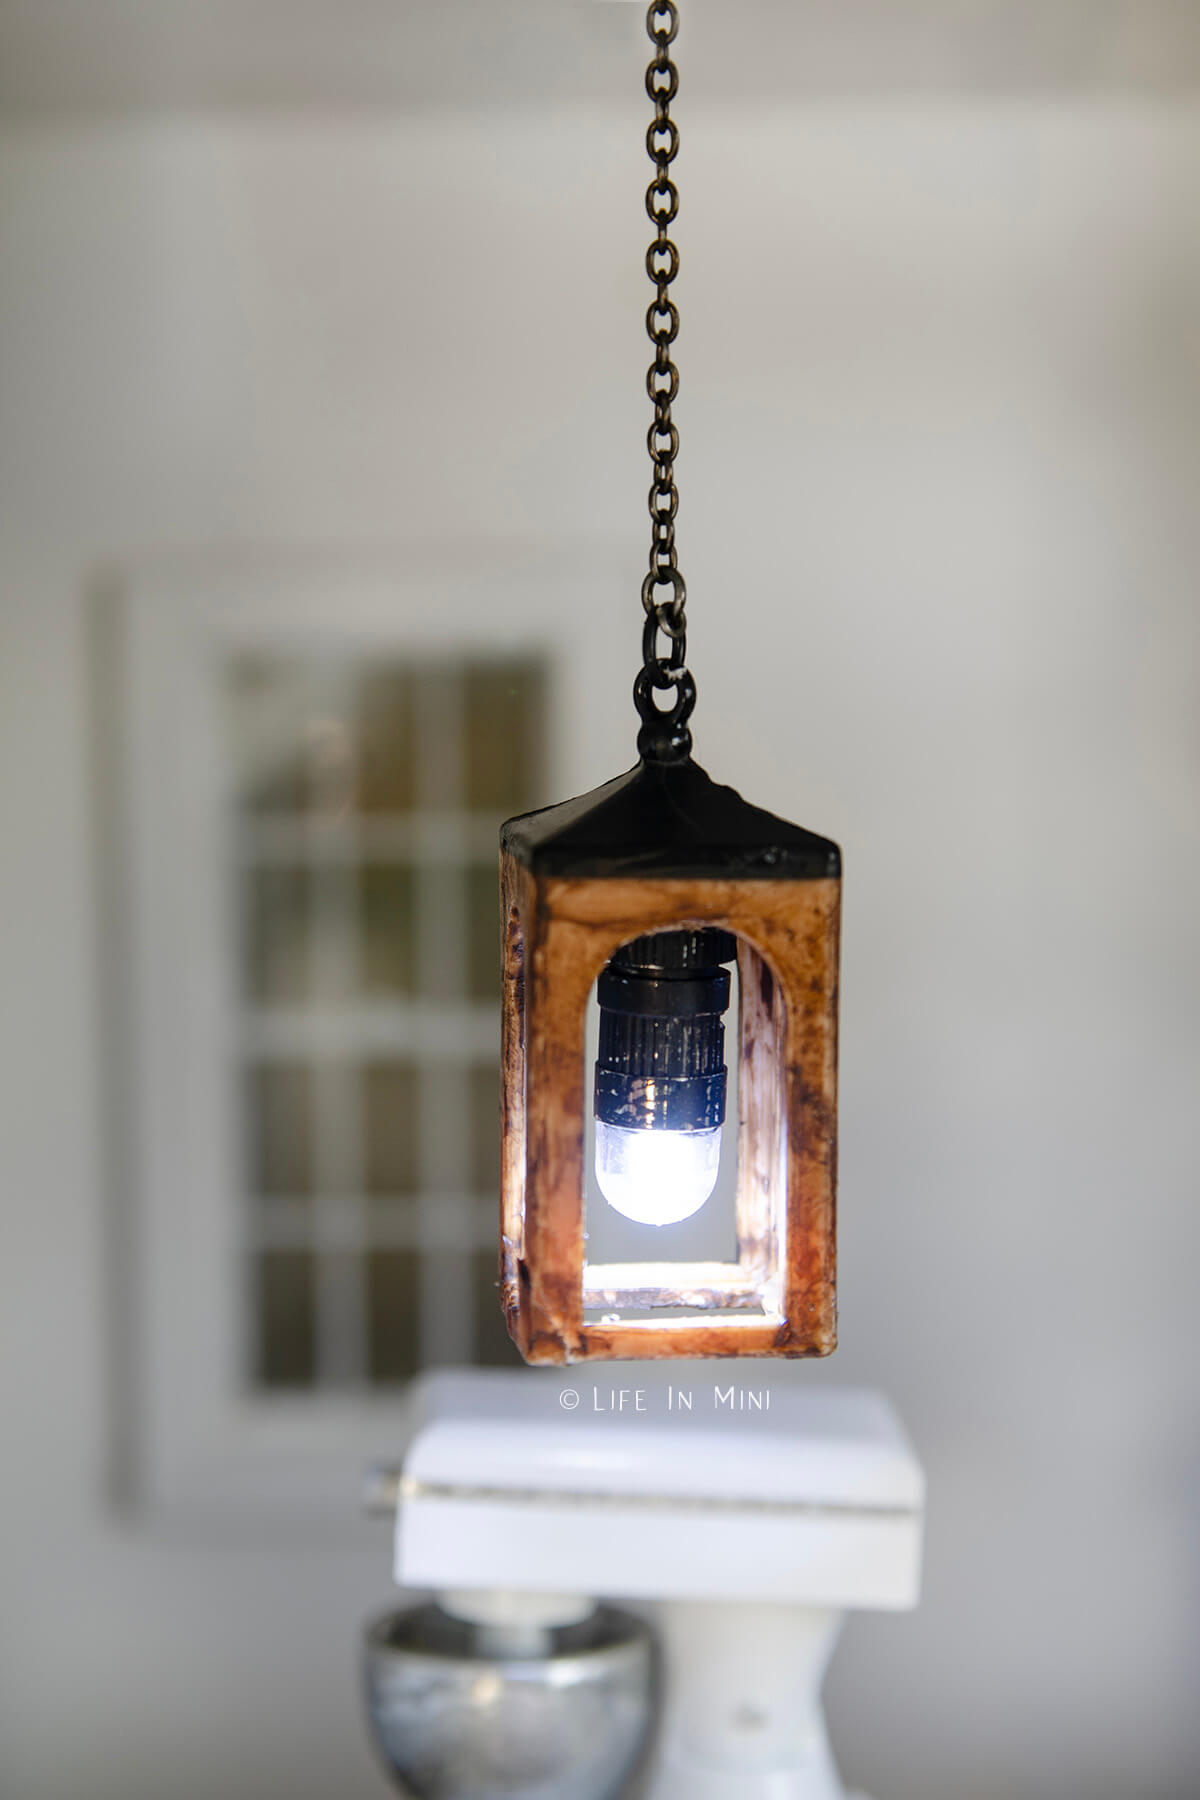 Closeup of a miniature lantern pendant light lit and hanging in a dollhouse